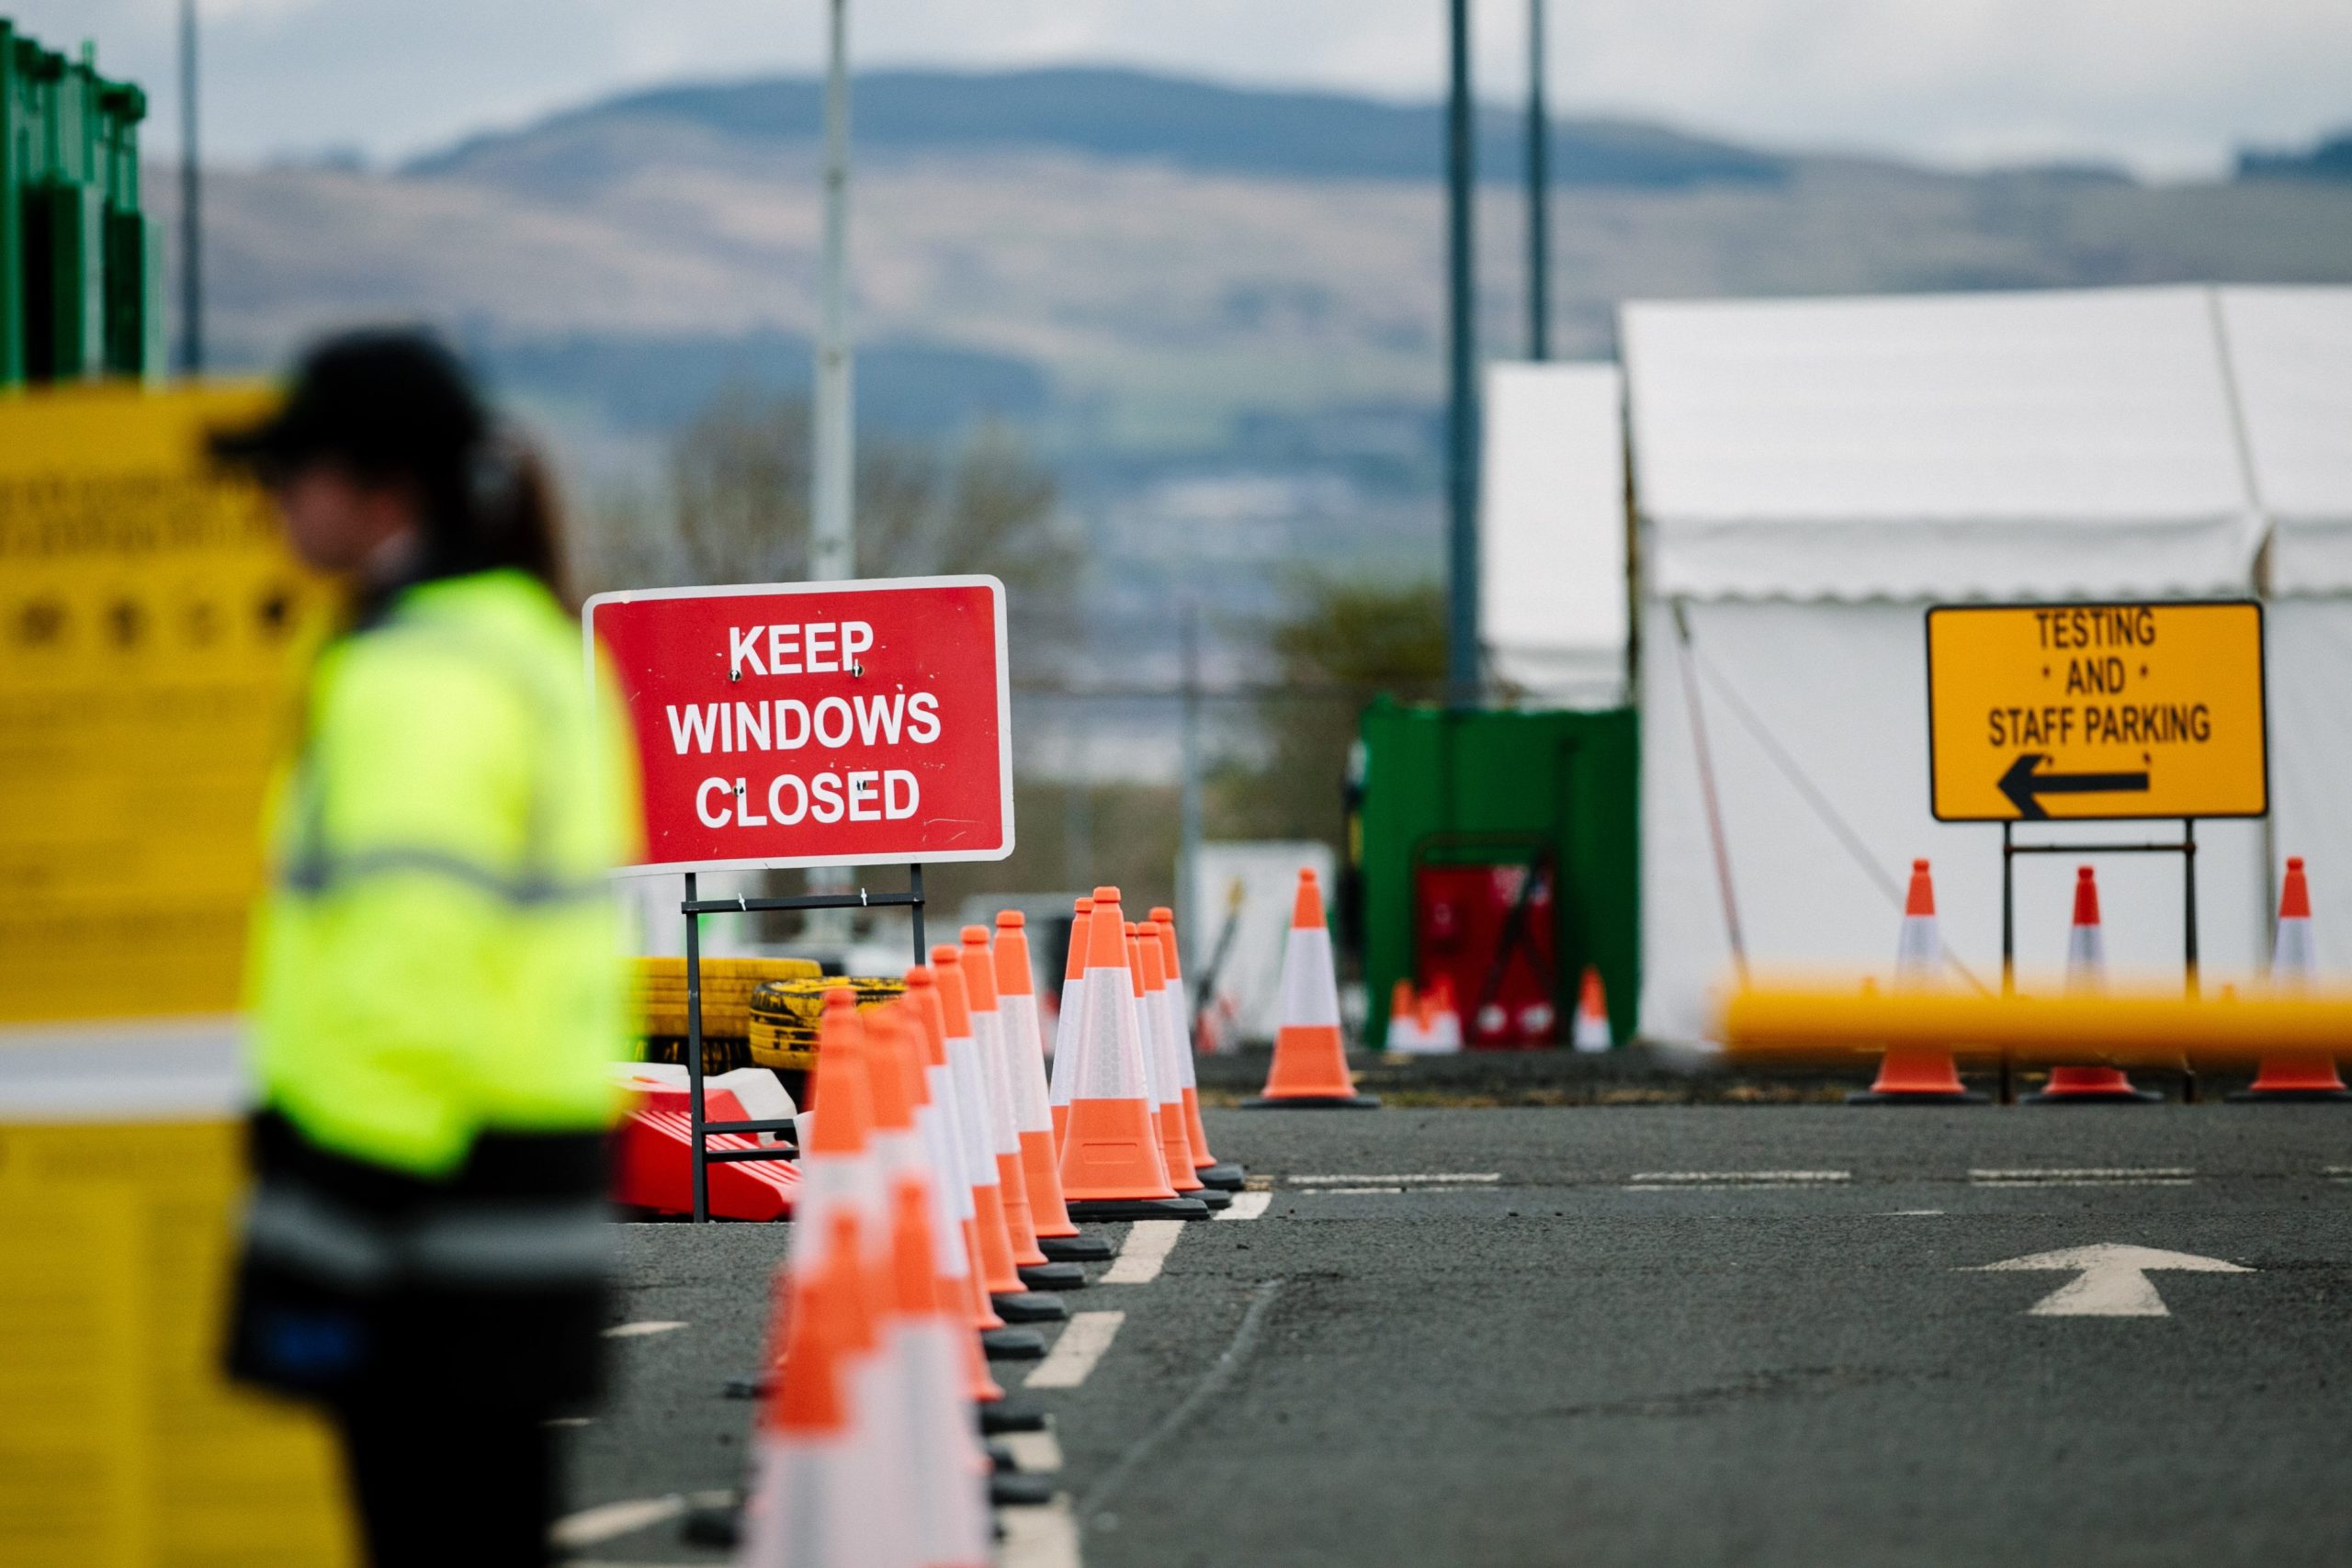 The new drive-through test centre at Glasgow Airport will be staffed by workers from Boots